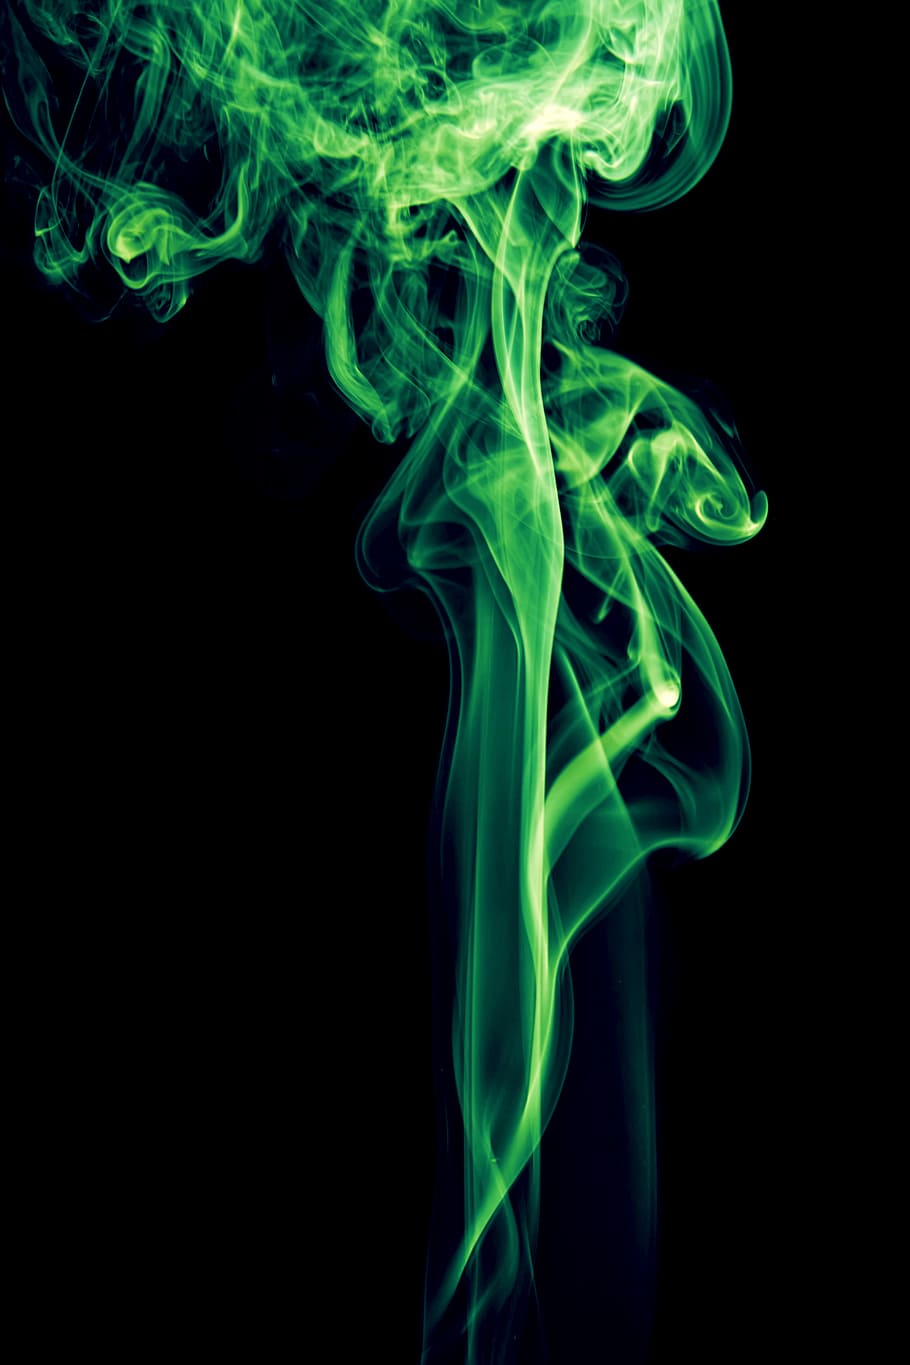 smoke, smell, color, aroma, abstract, background, aromatherapy, black background, smoke - physical structure, studio shot